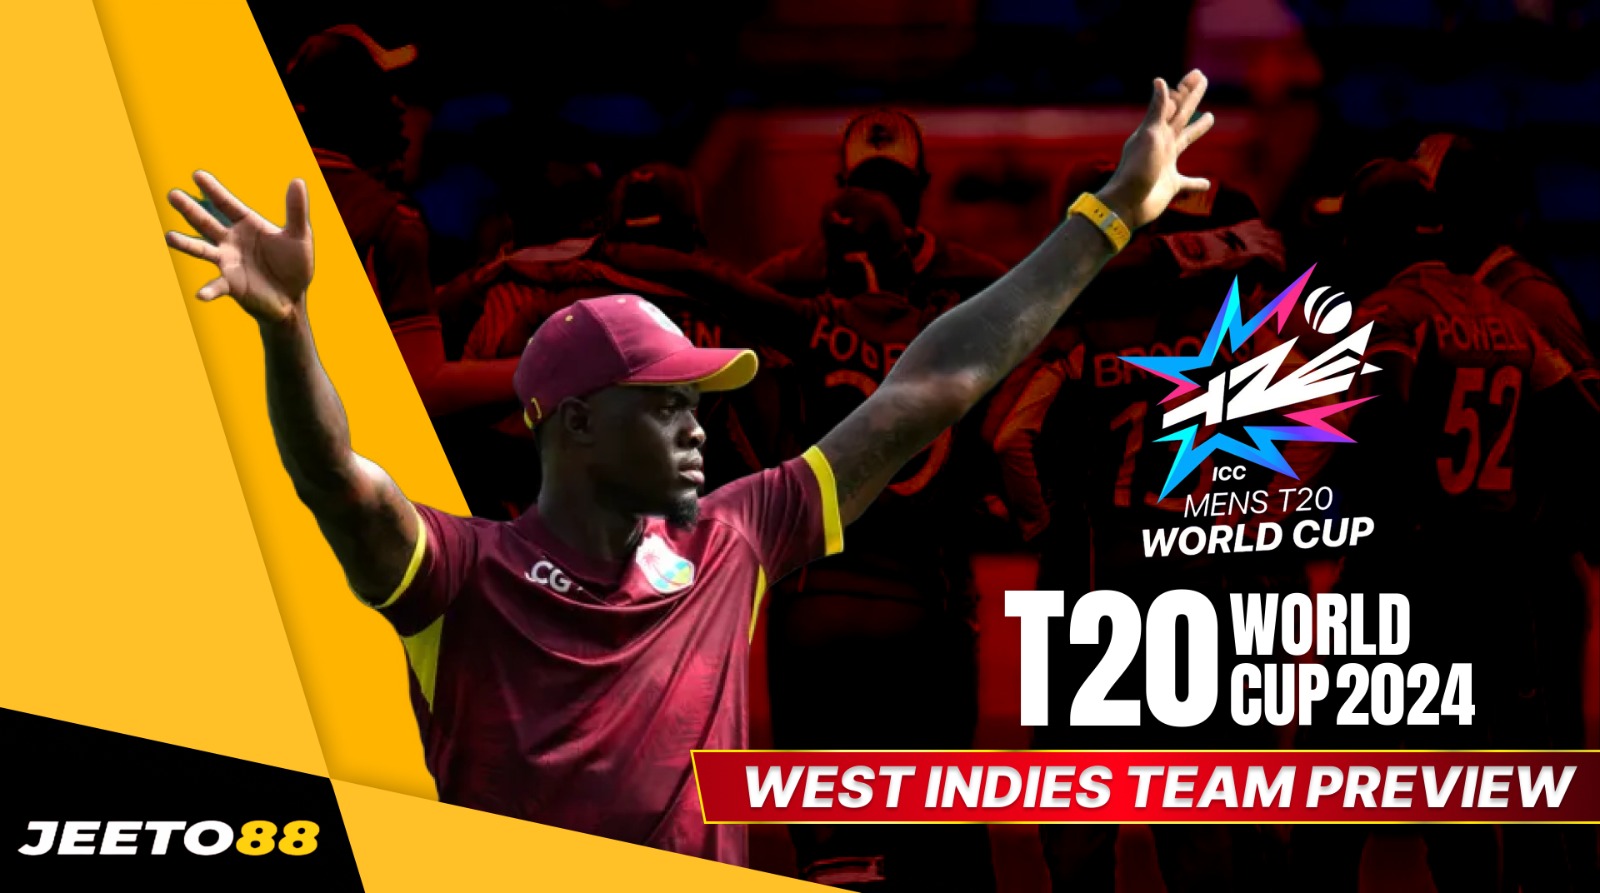 ICC Men’s T20 World Cup 2024: West Indies Team Preview - Article Book